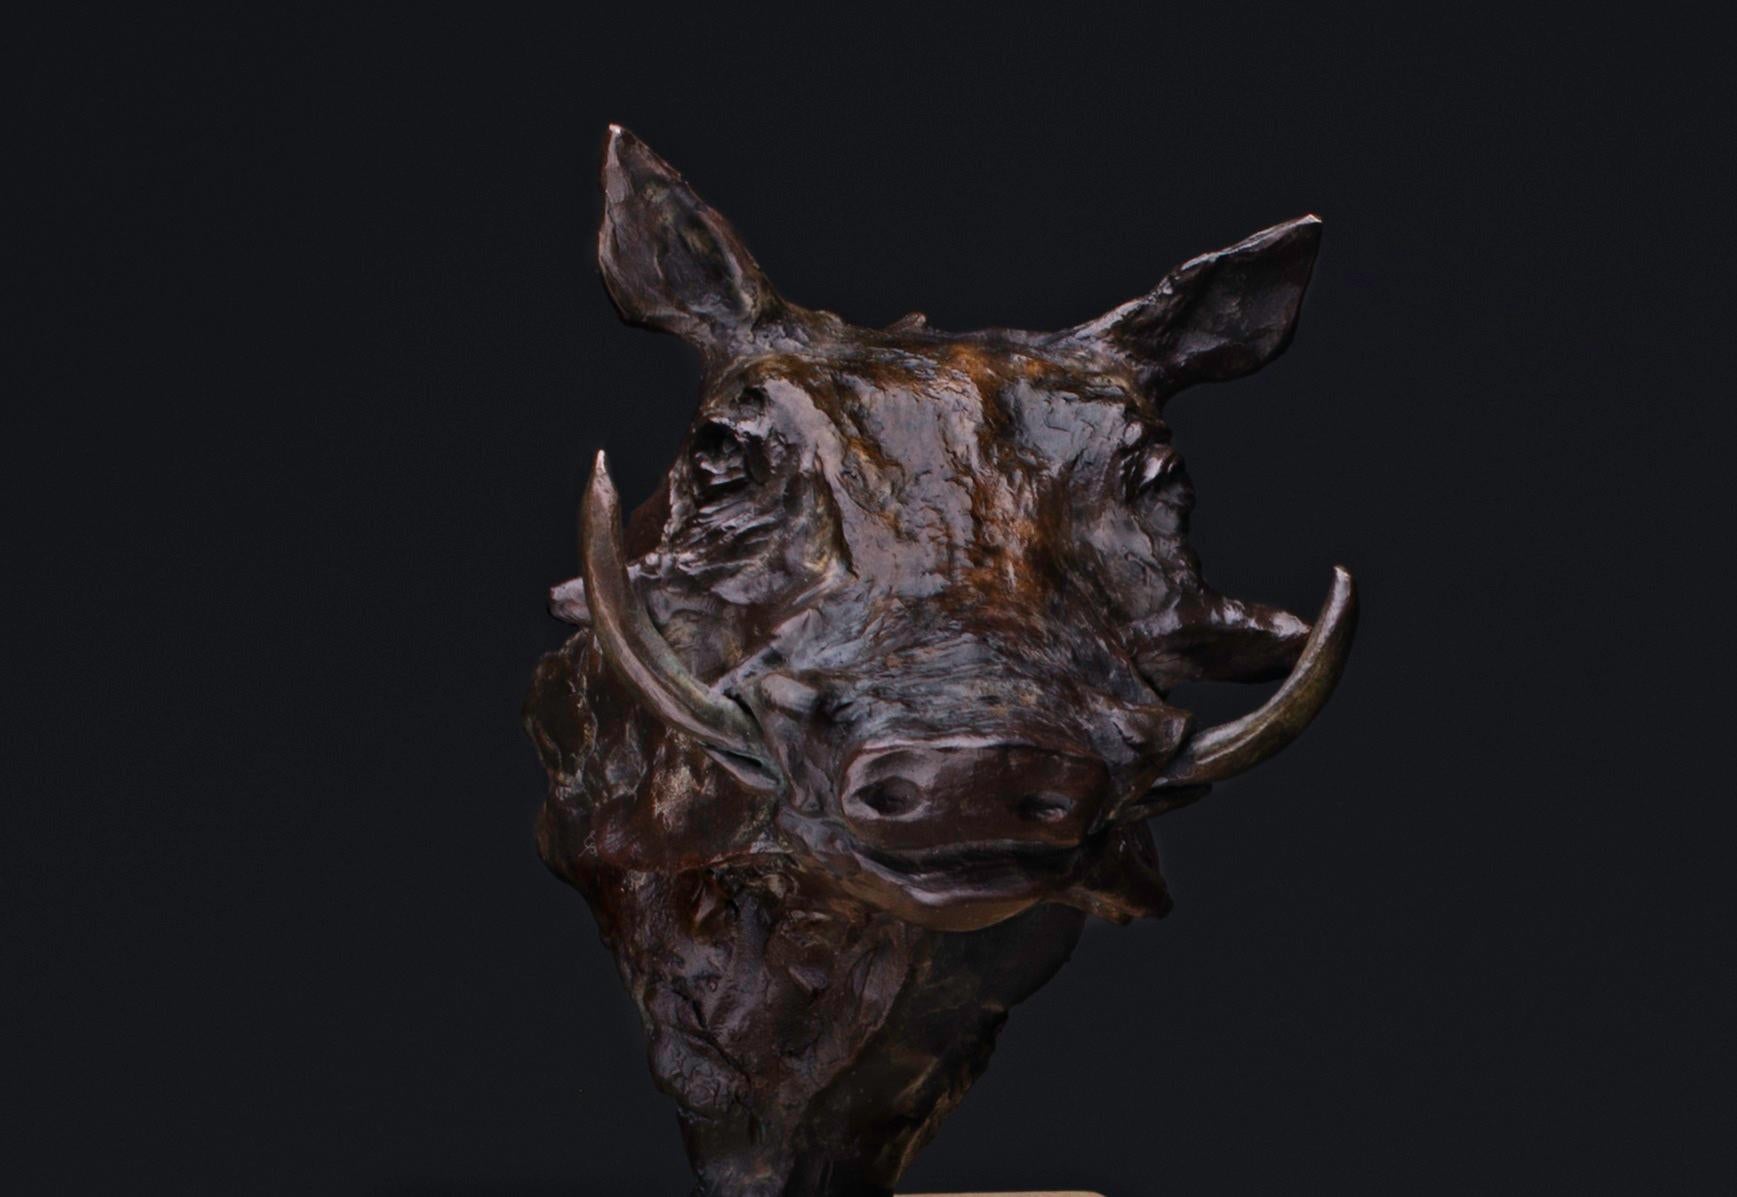 Bronze Warthog Bust on Sandstone base H 16 cm x W 13 cm x D 8 cm. Base size 8 x 8 x 4 cm. Edition 2 of 9 - ready for shipping. Meticulously crafted, this bronze artwork captures the poise and alertness of the warthog – a testament in bronze to